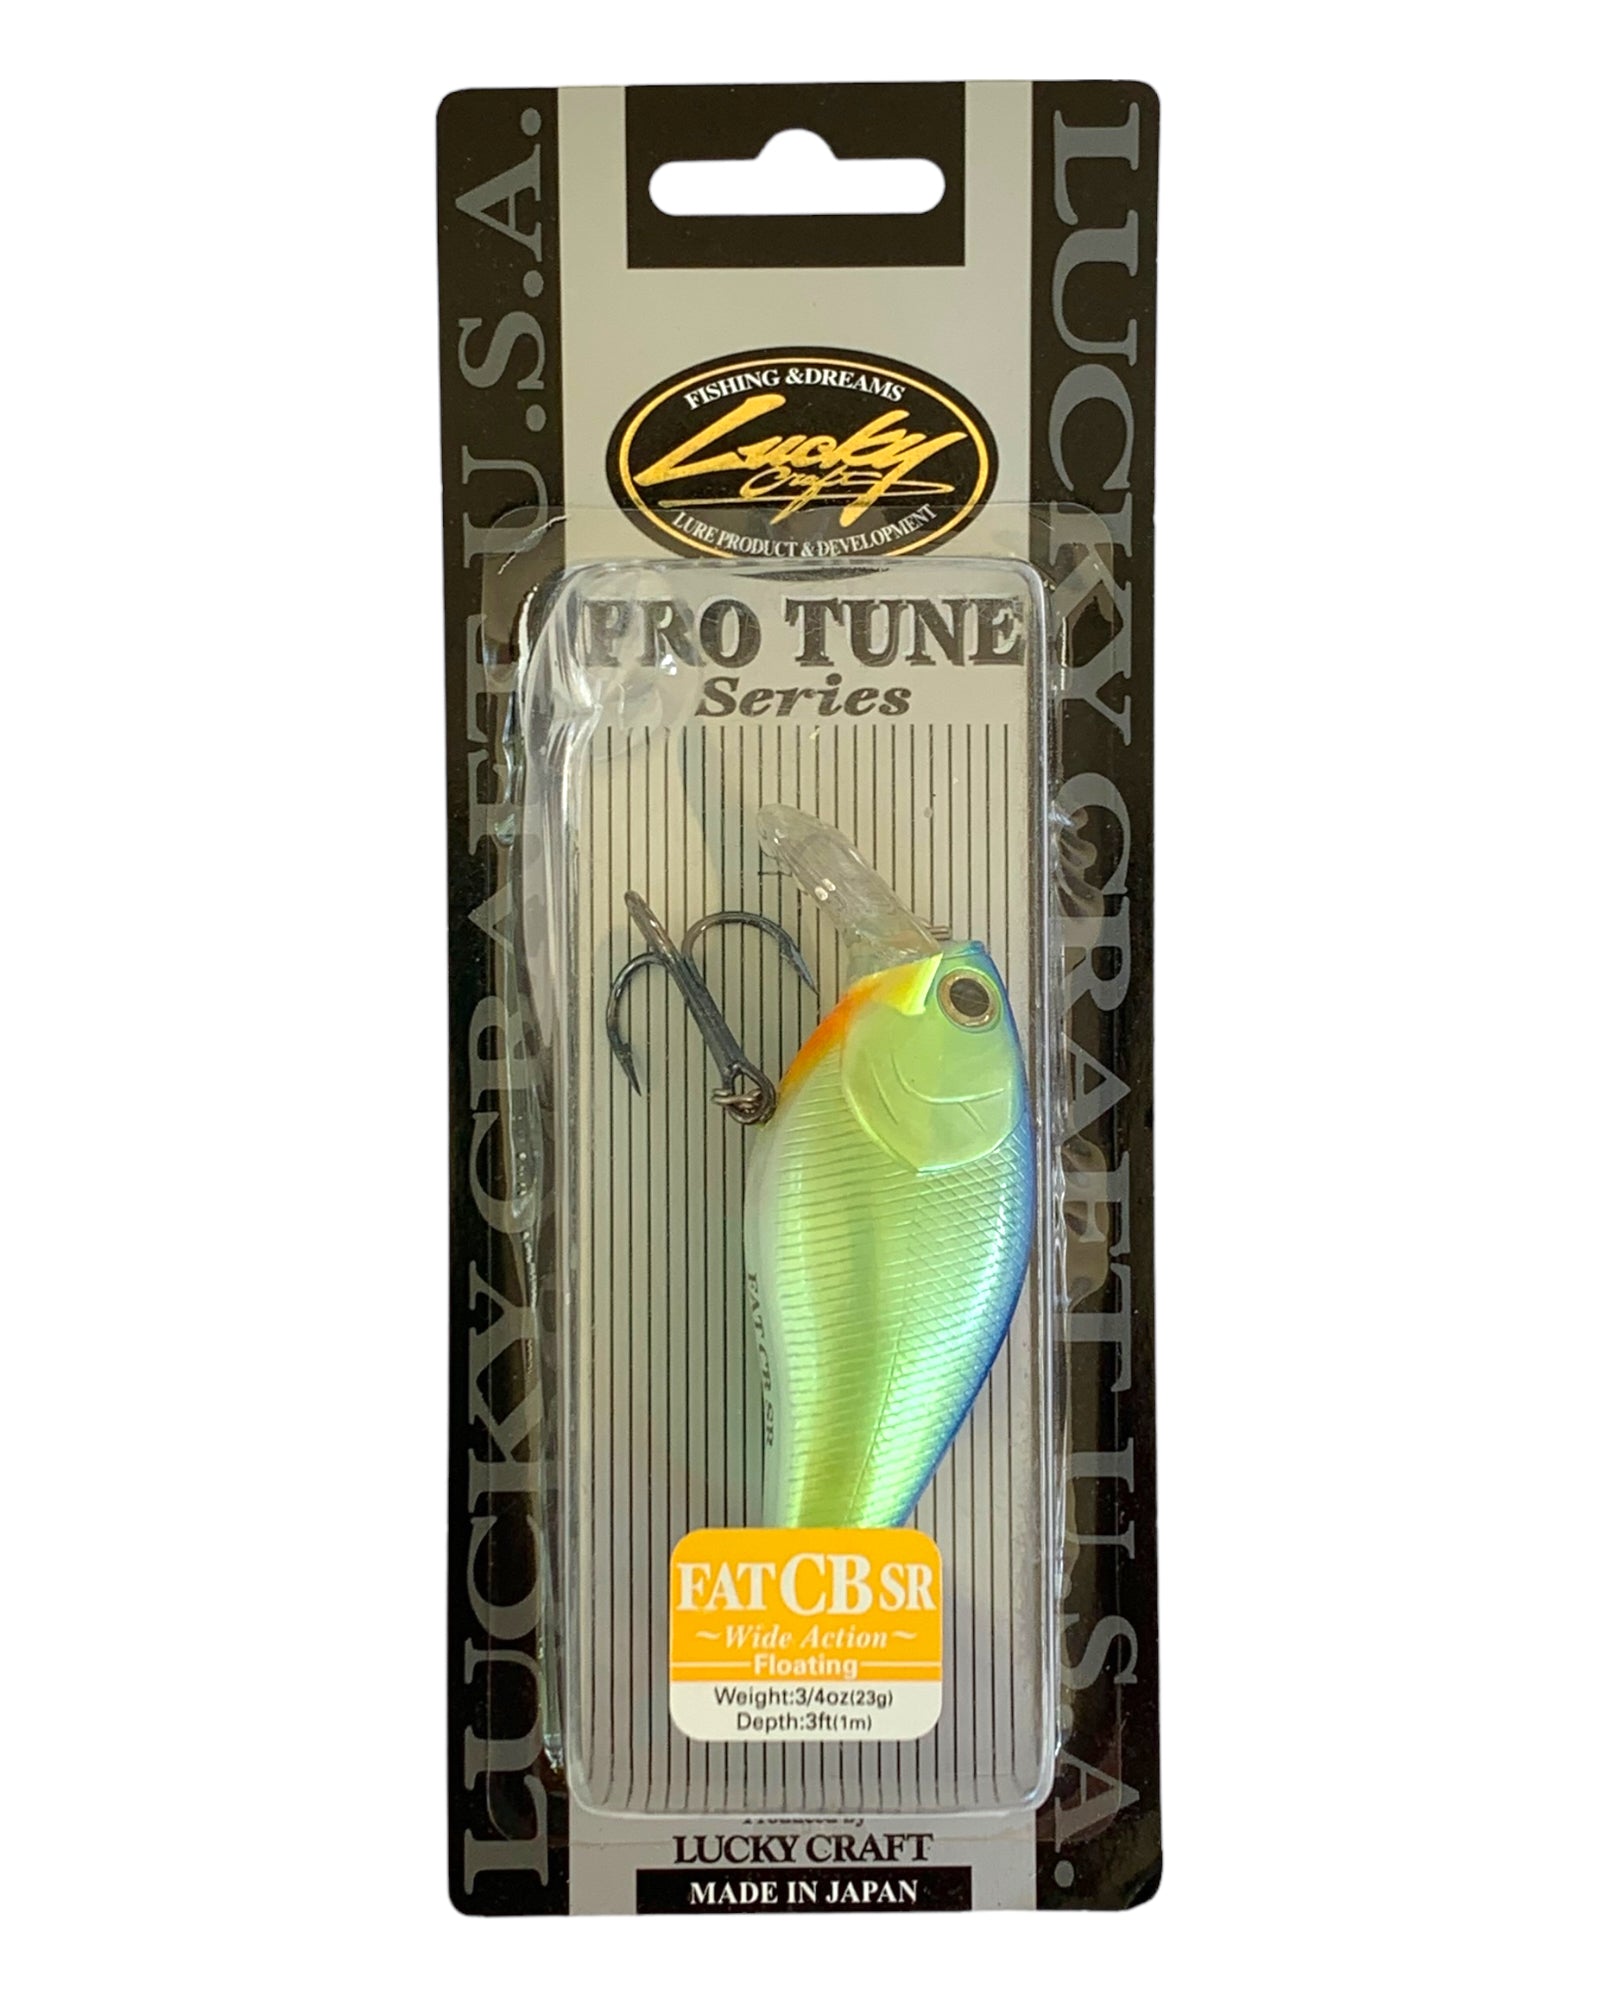 The Pros of Chartreuse Lures